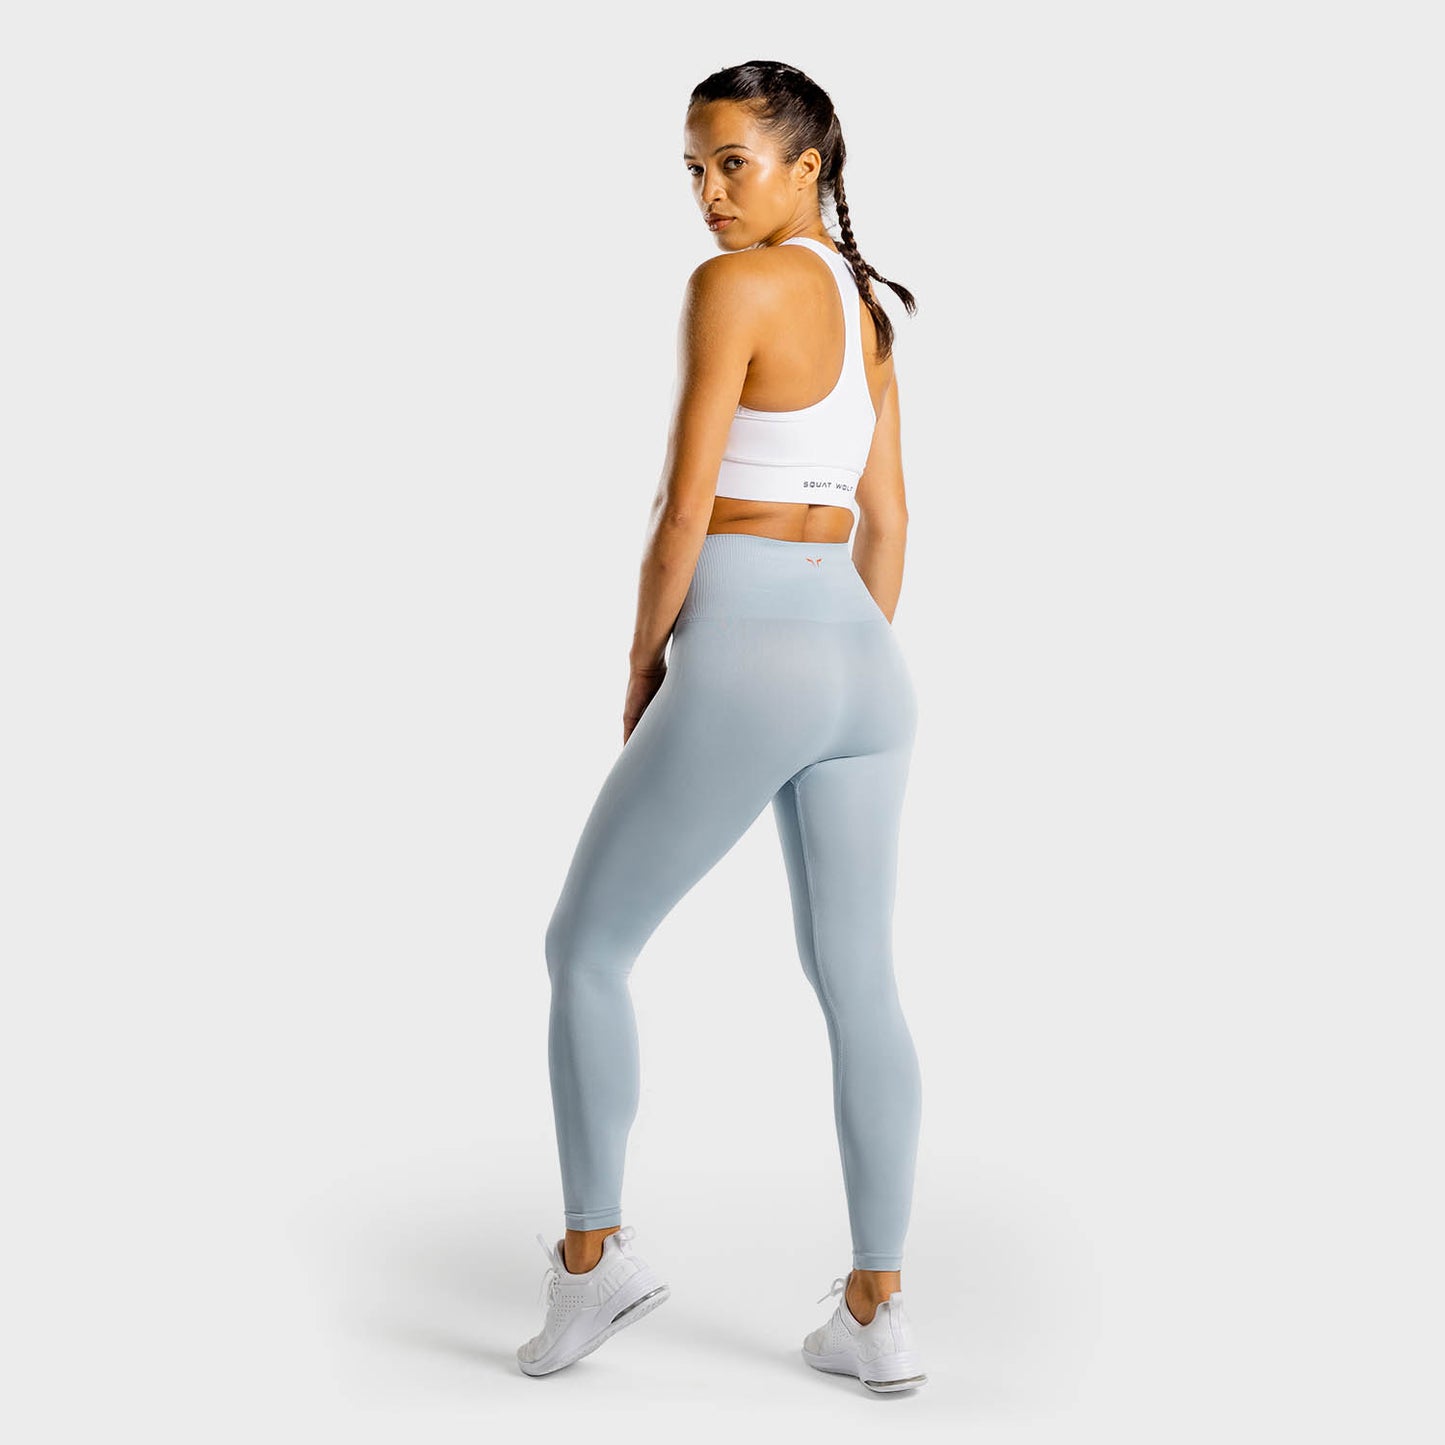 squatwolf-gym-leggings-for-women-core-seamless-leggings-grey-workout-clothes